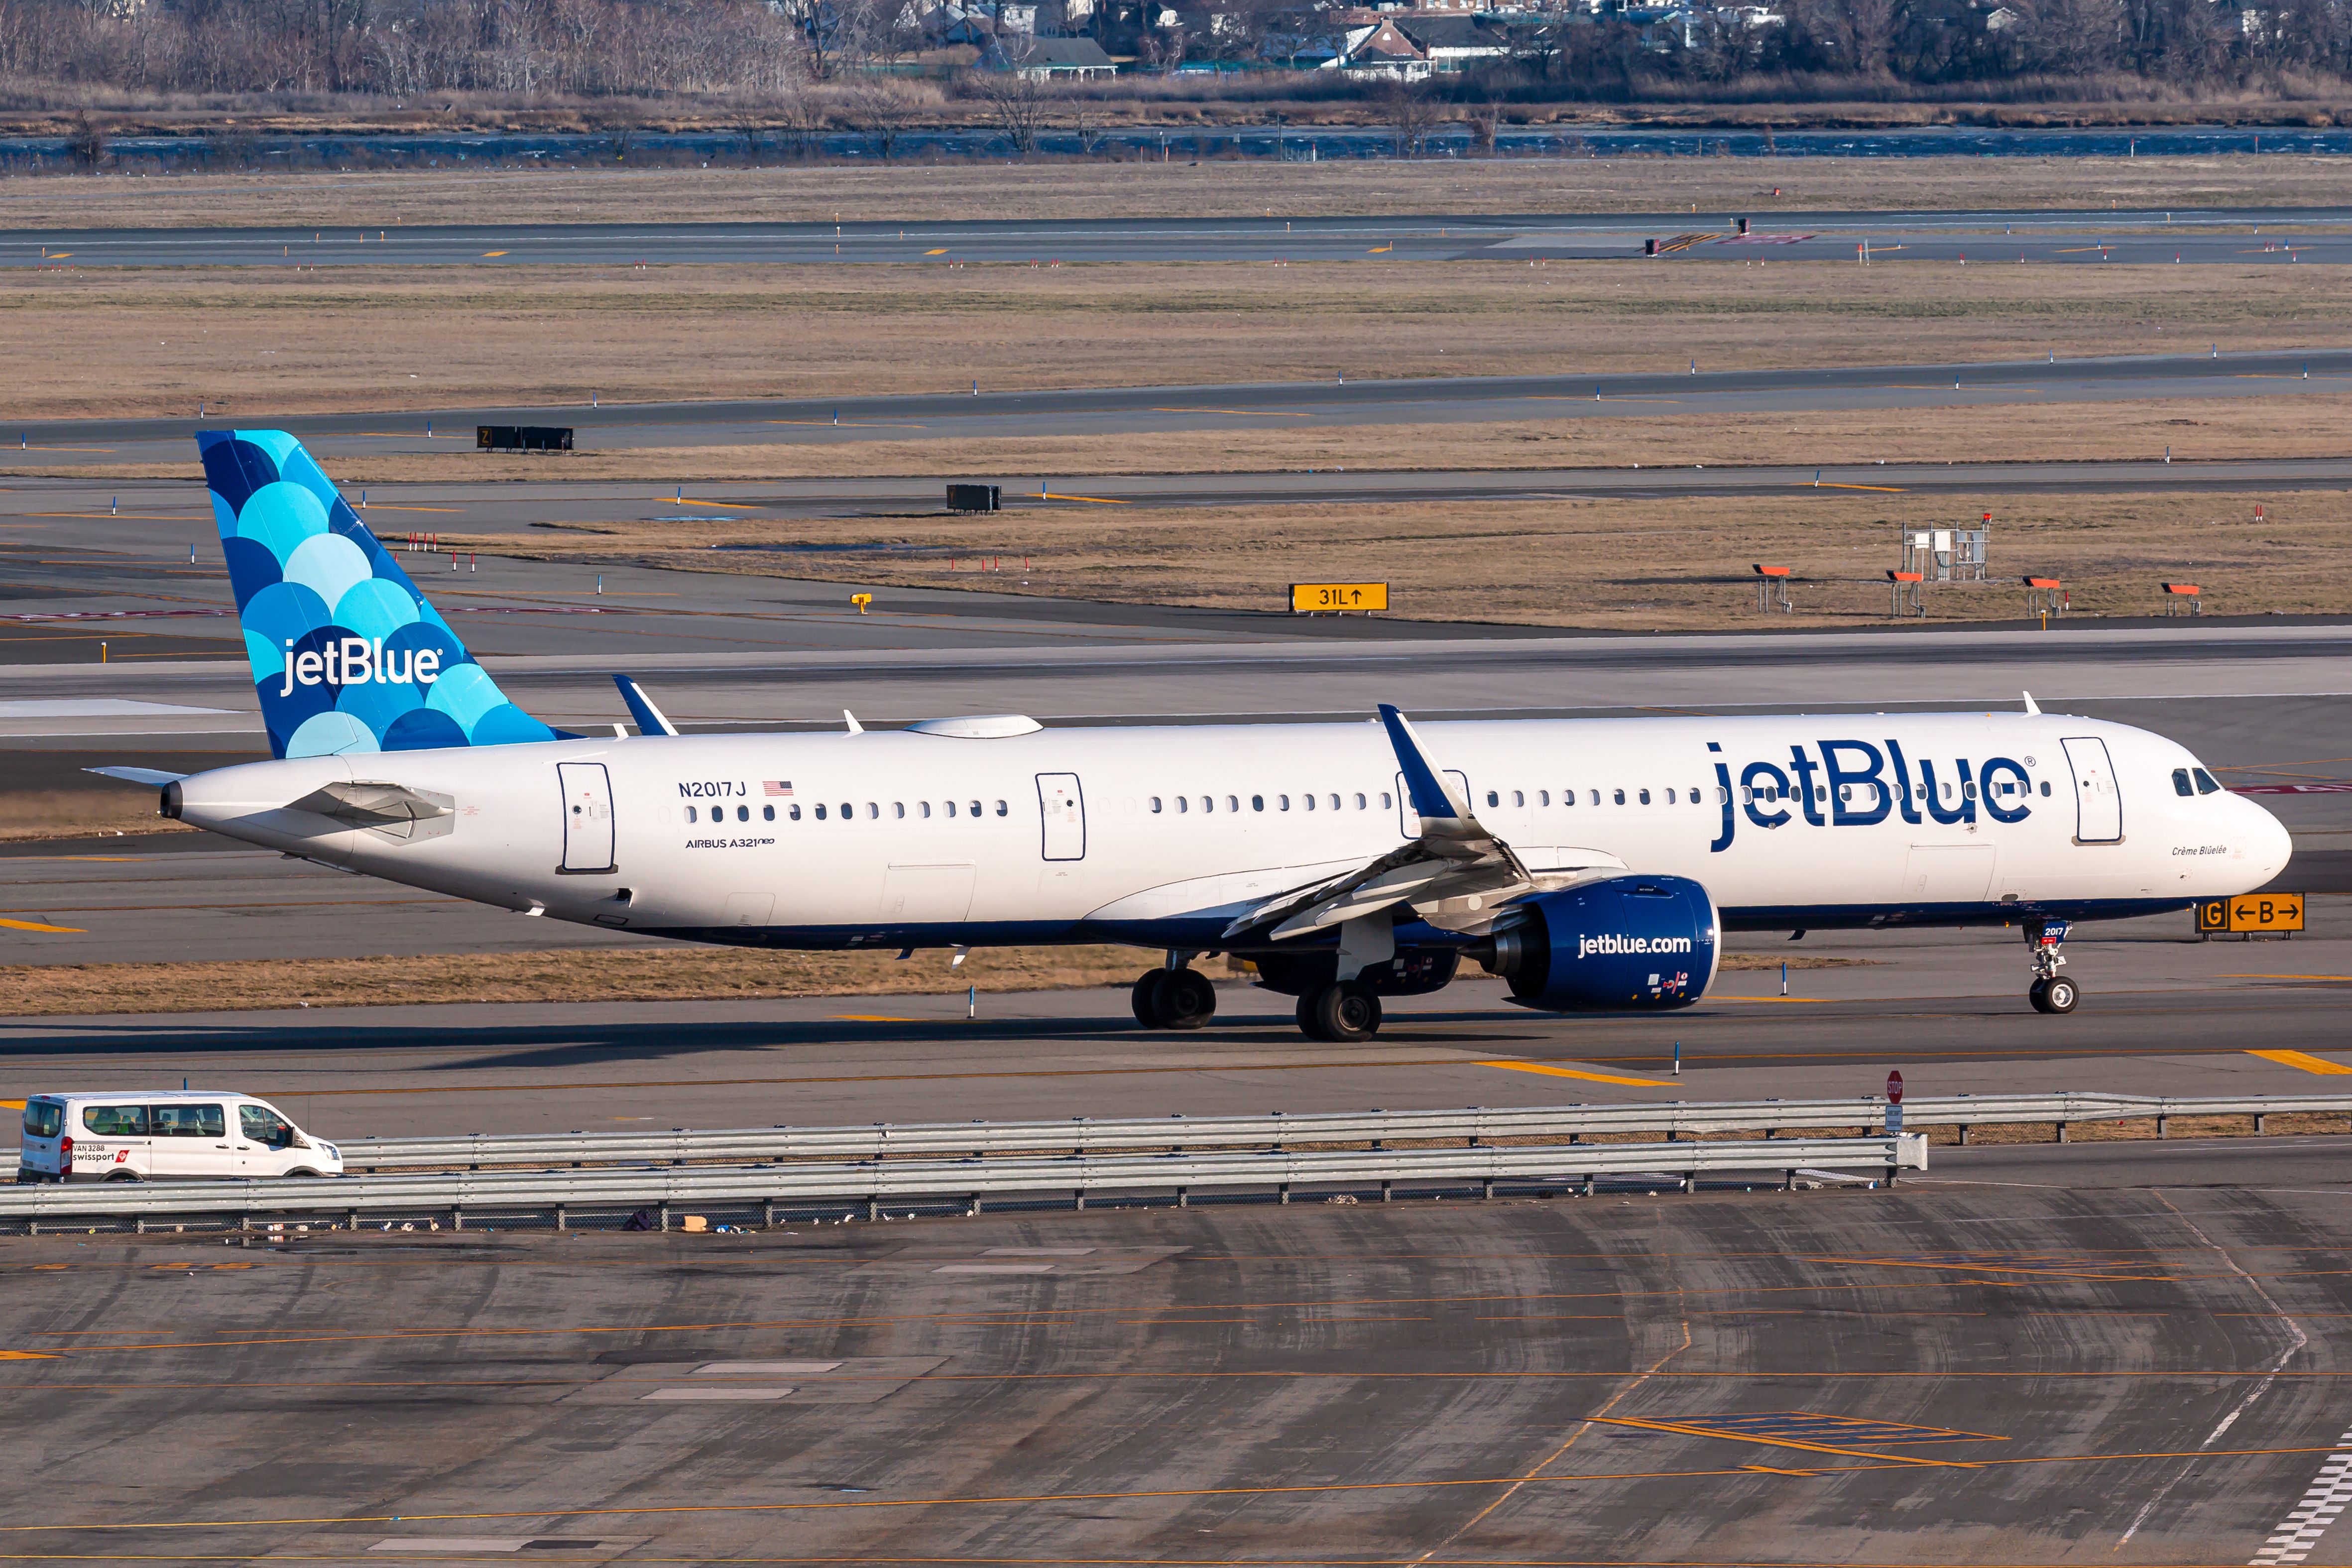 JetBlue A321neo aircraft on taxiway